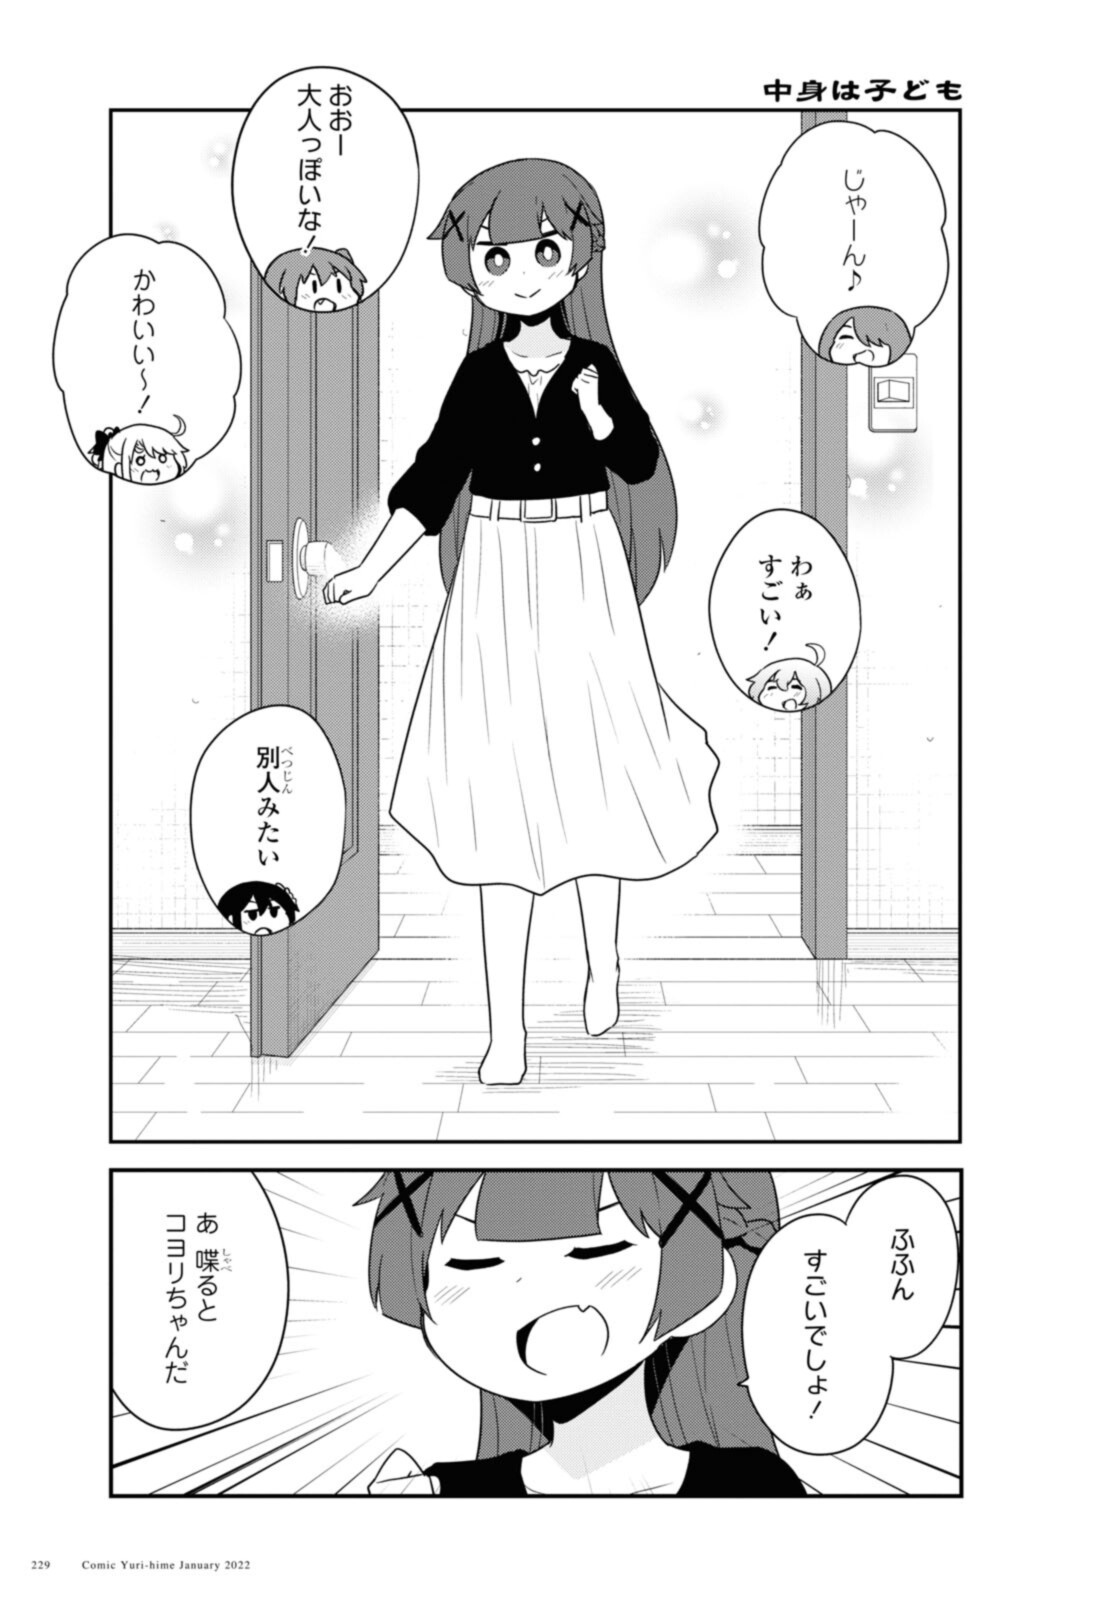 Wataten! An Angel Flew Down to Me 私に天使が舞い降りた！ 第91話 - Page 9